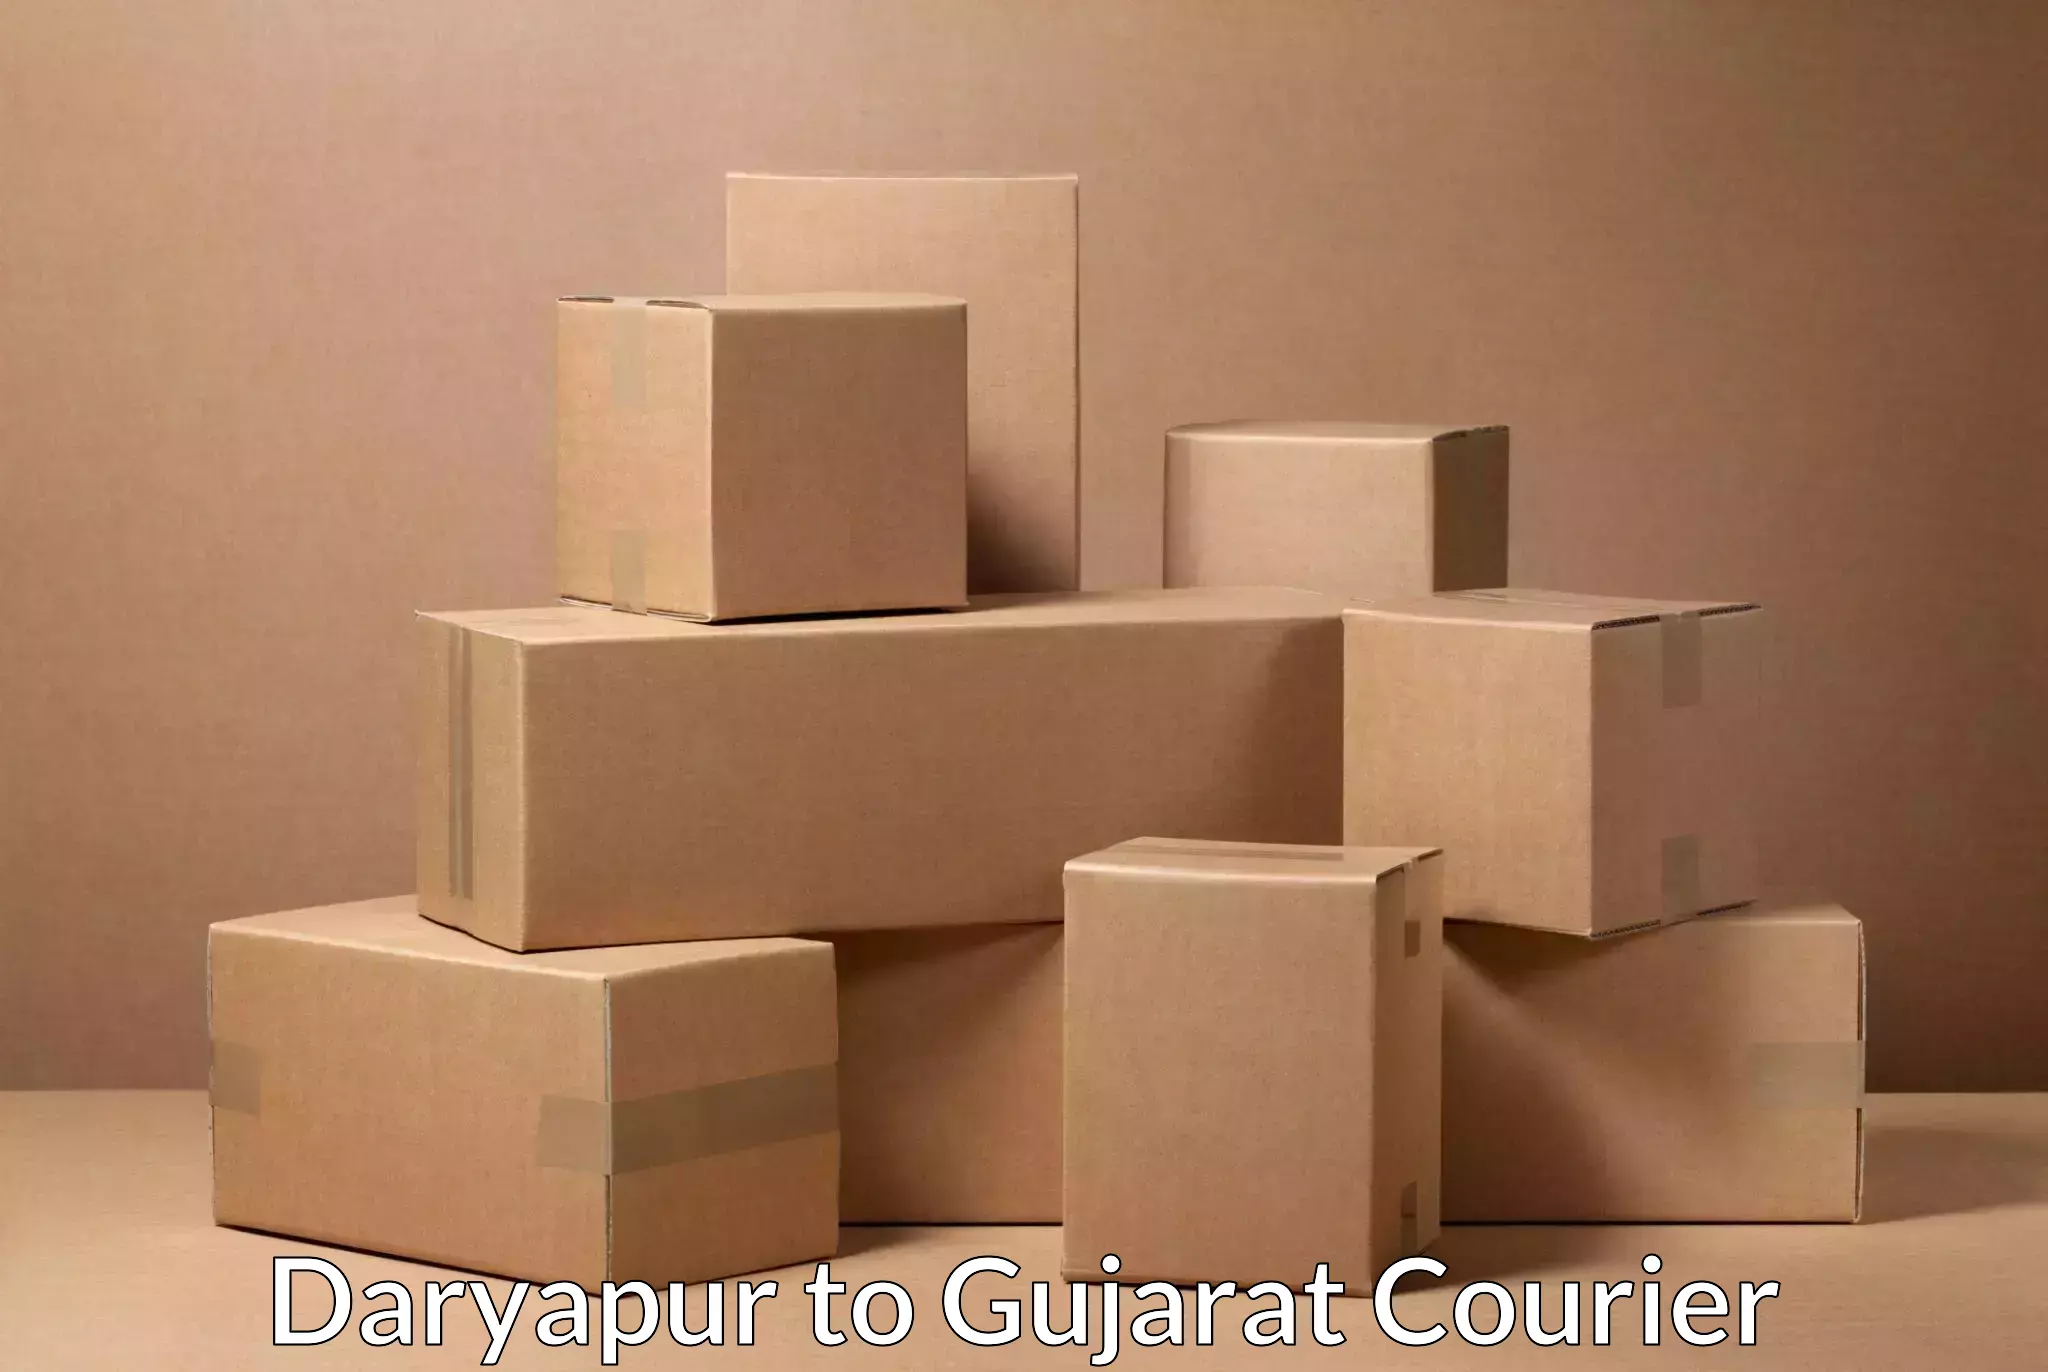 Efficient package consolidation in Daryapur to Gujarat